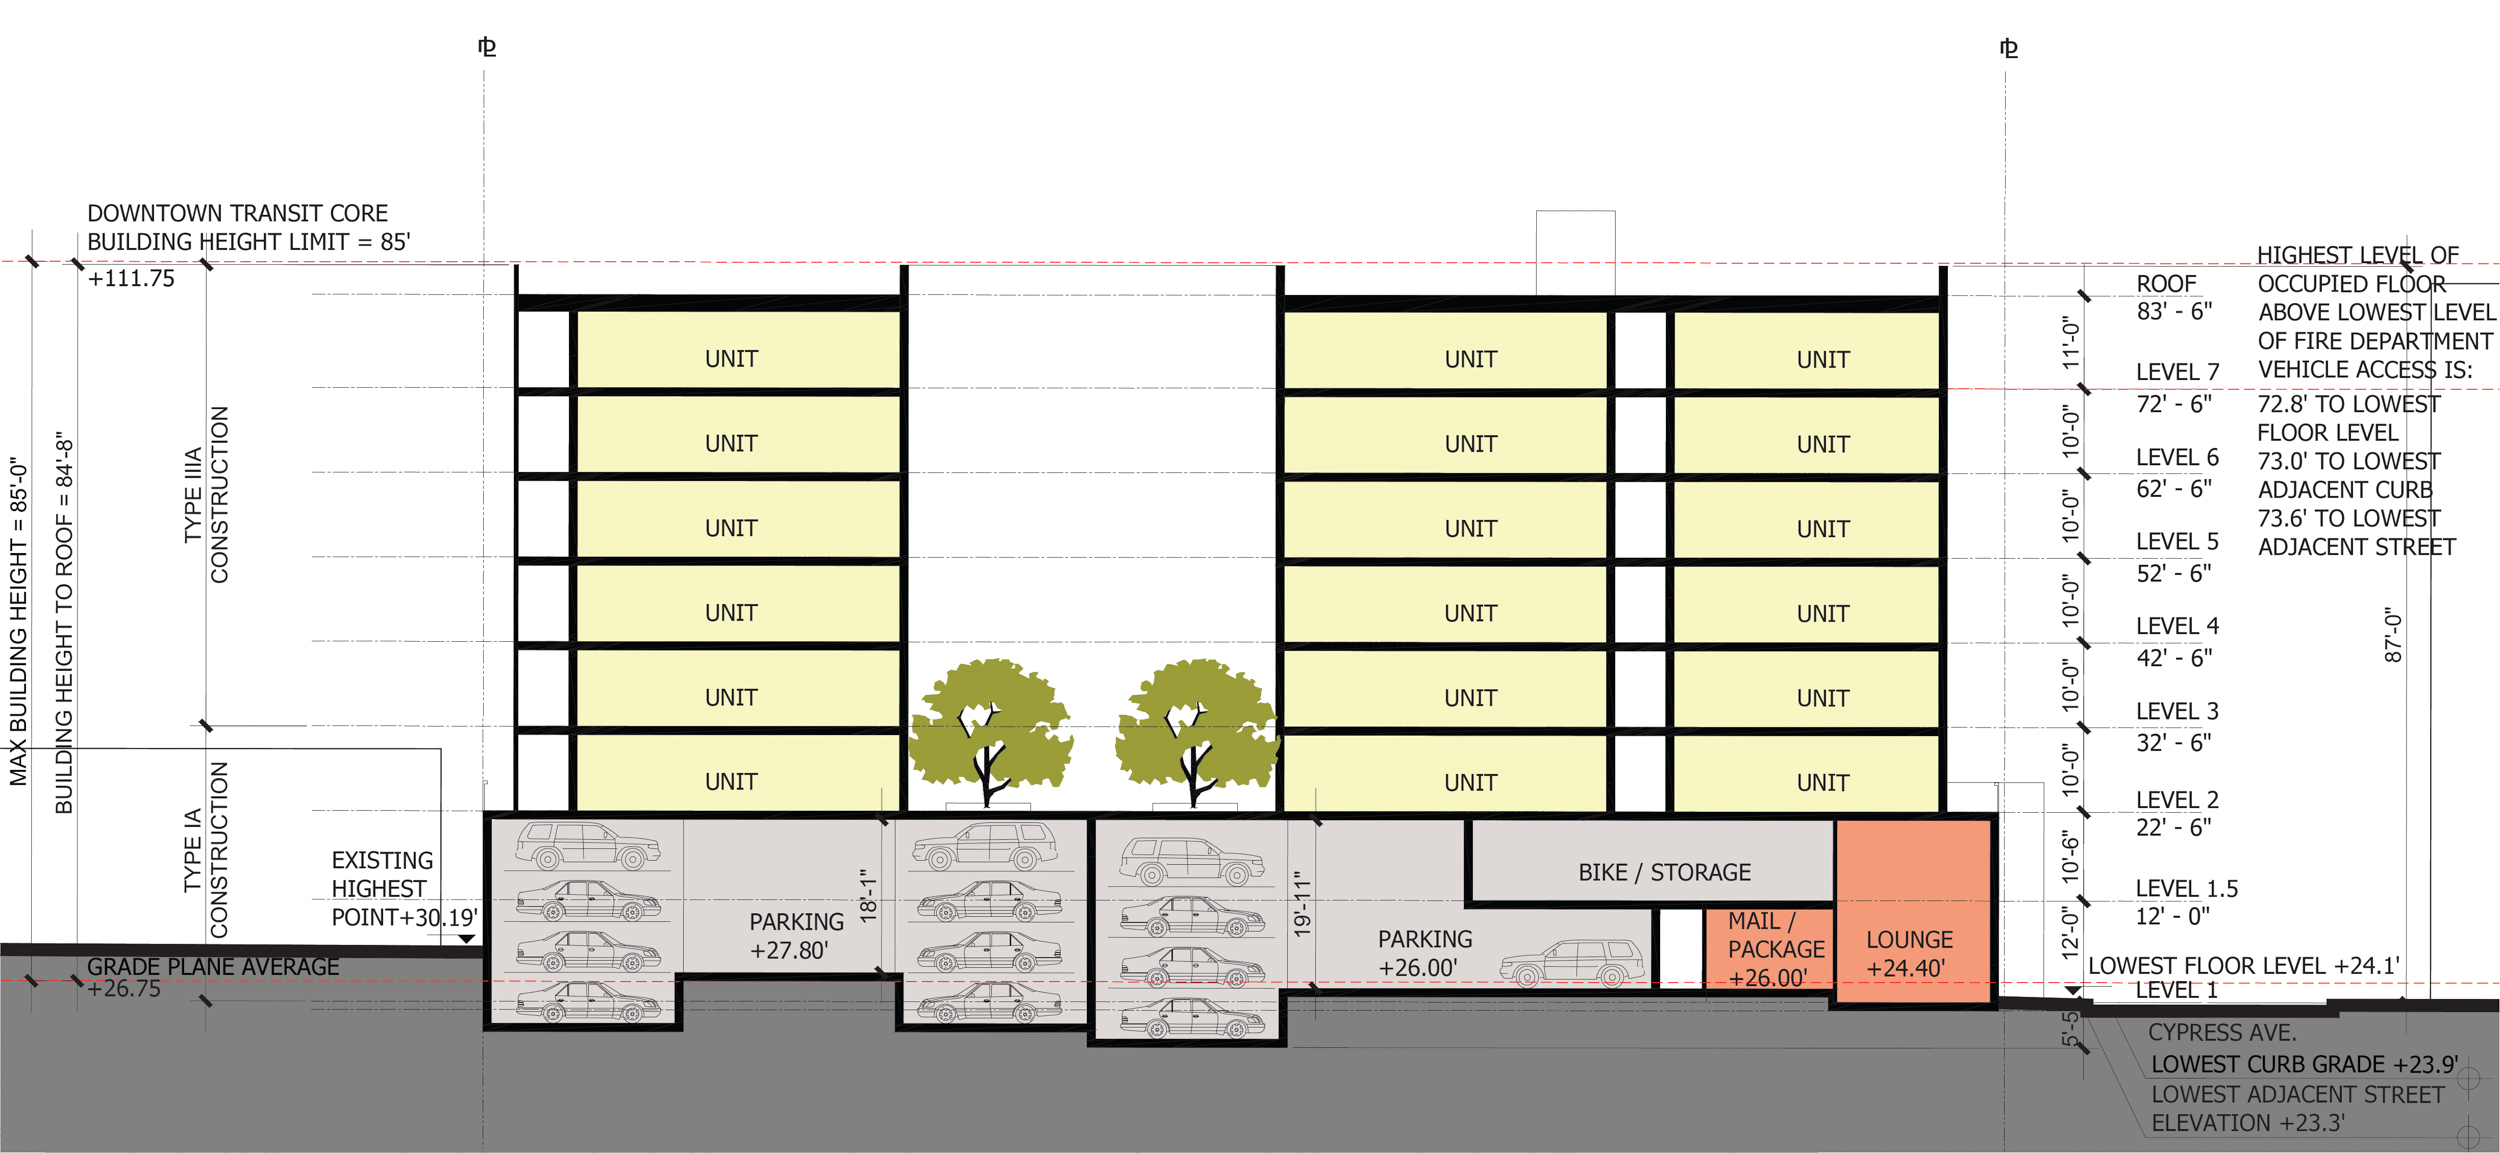 421 Cypress Avenue vertical cross-section, illustration by Studio T-Square